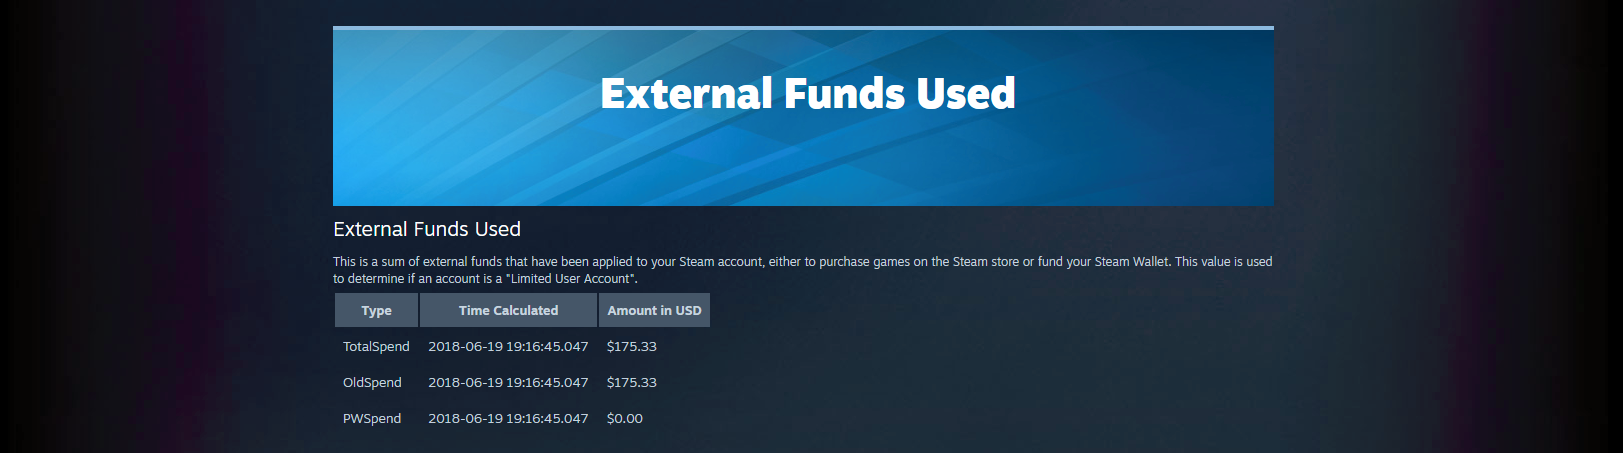 Discover How Much Money You’ve Spent On Steam With This Tool